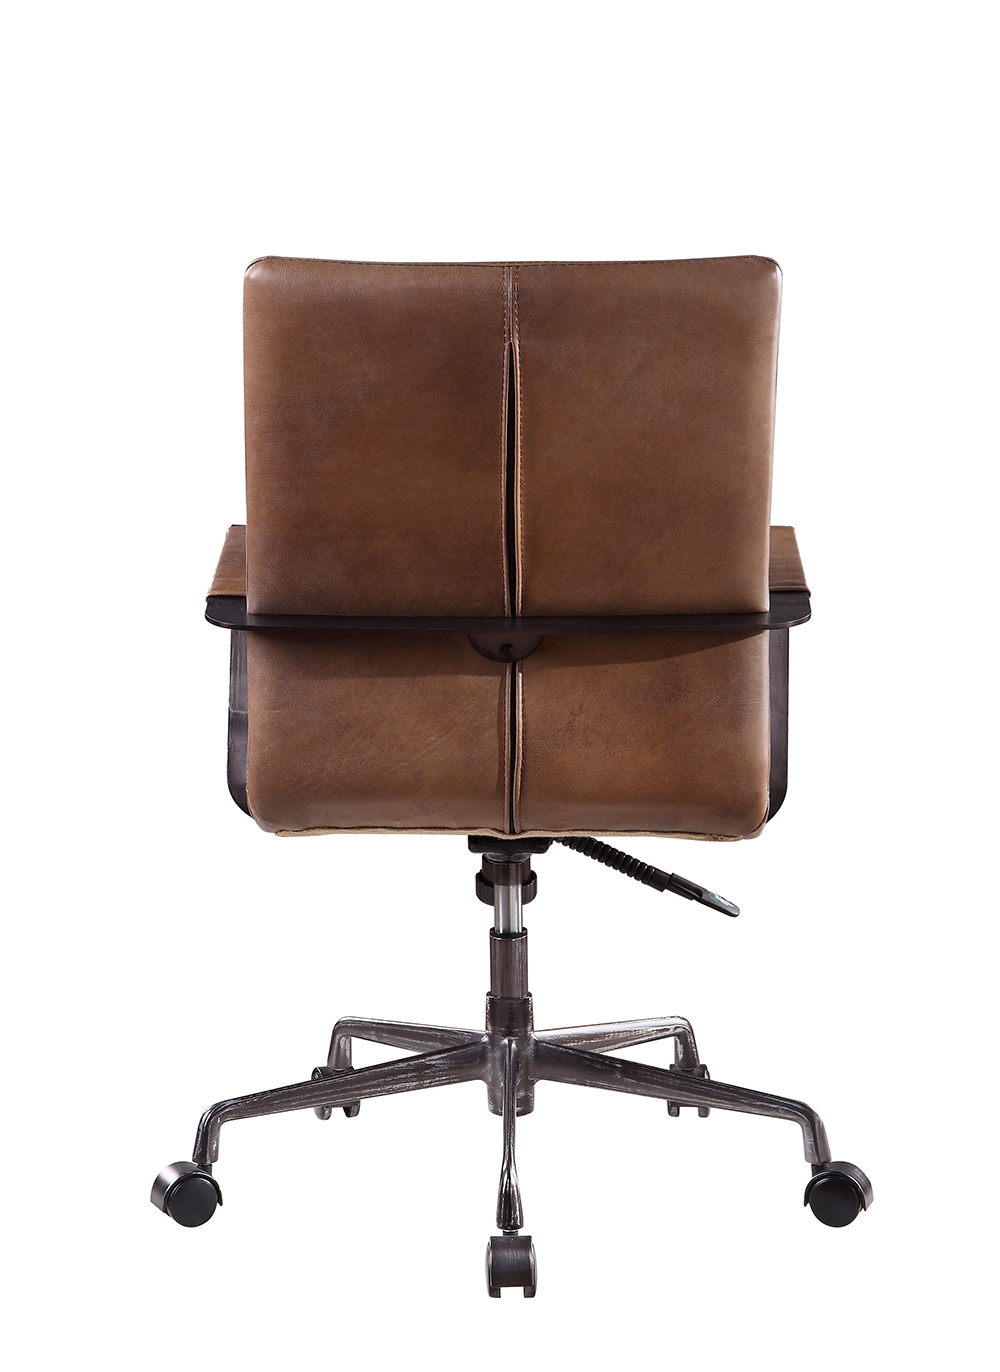 ACME Indra Leather Upholstered Swivel Office Chair, with High Backrest, and Metal Frame, for Restaurant, Cafe, Tavern, Office, Living Room - Brown